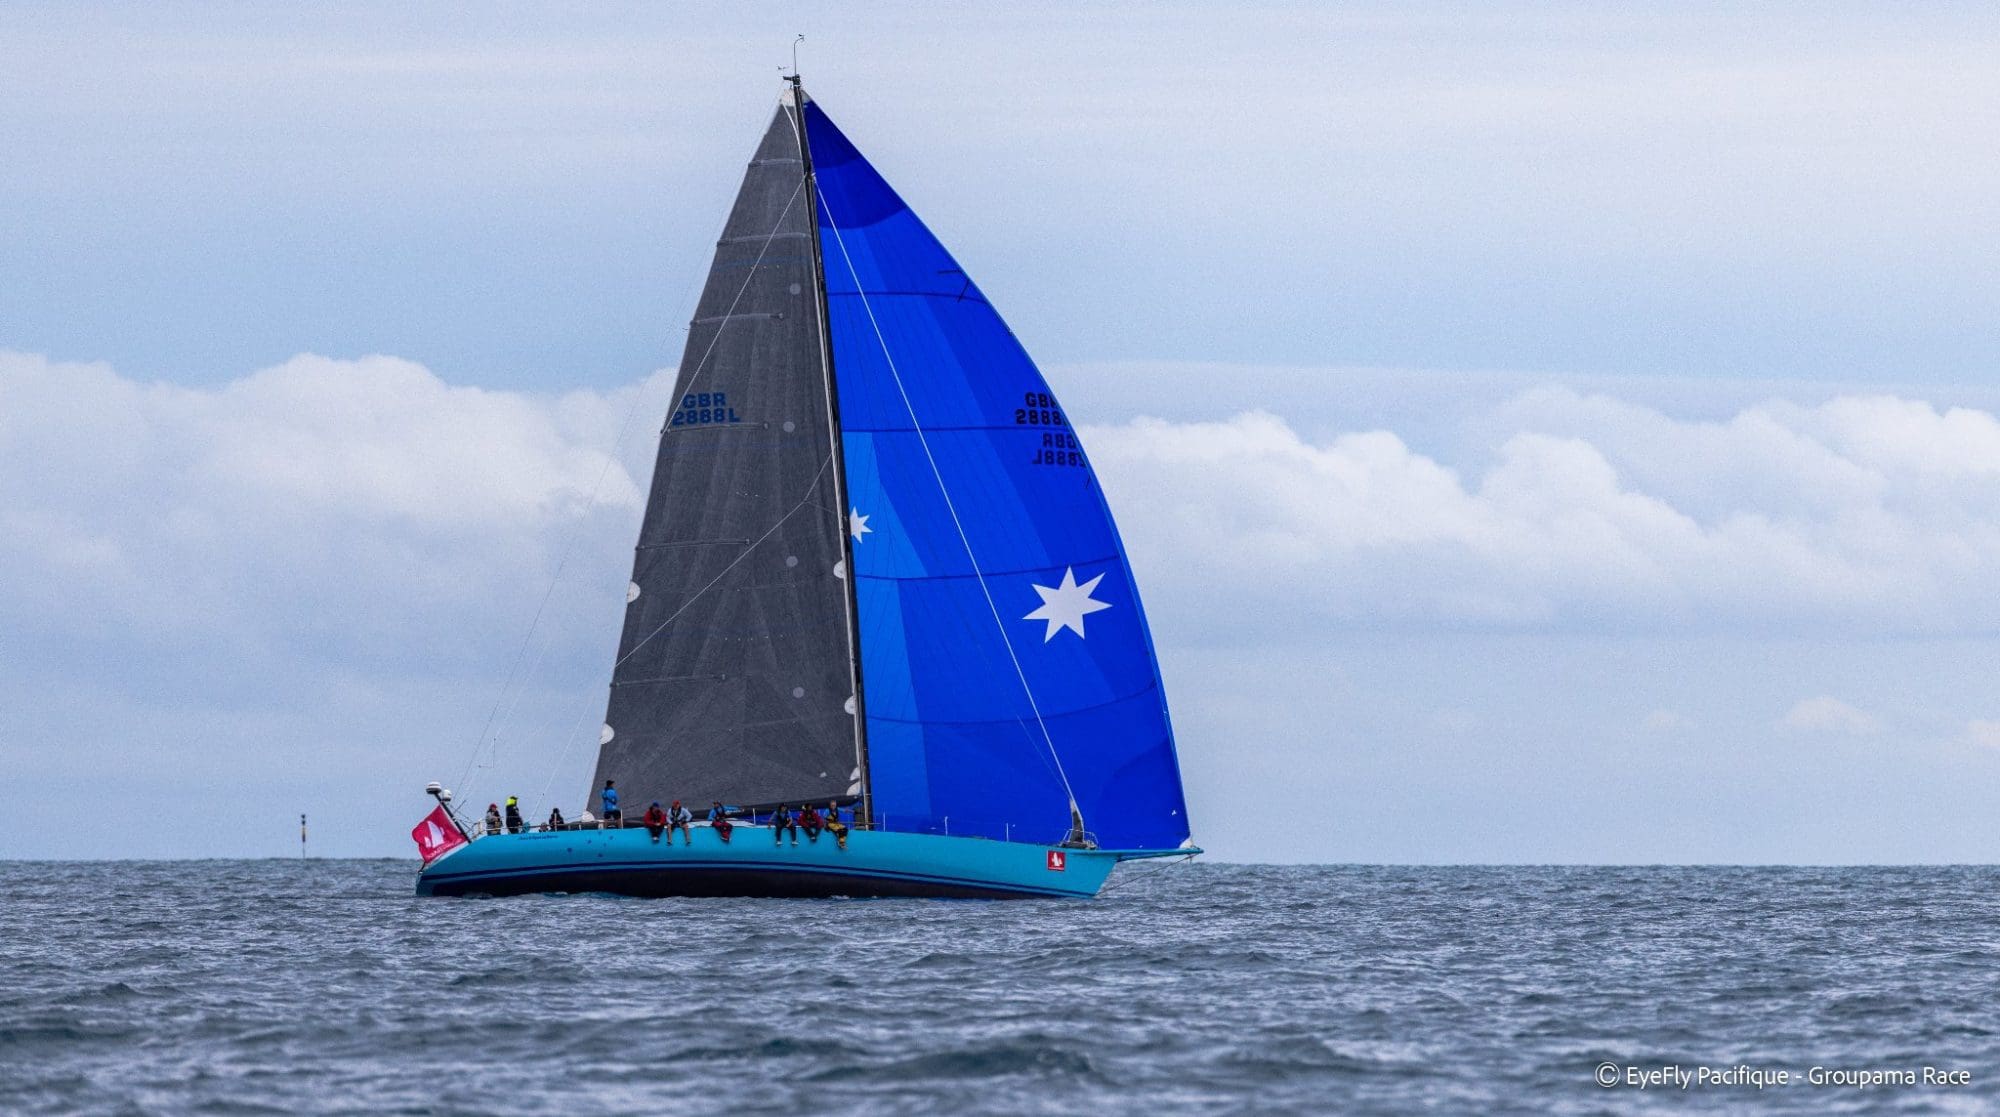 Antipodes at the start of the New Caledonia Groupama Race.